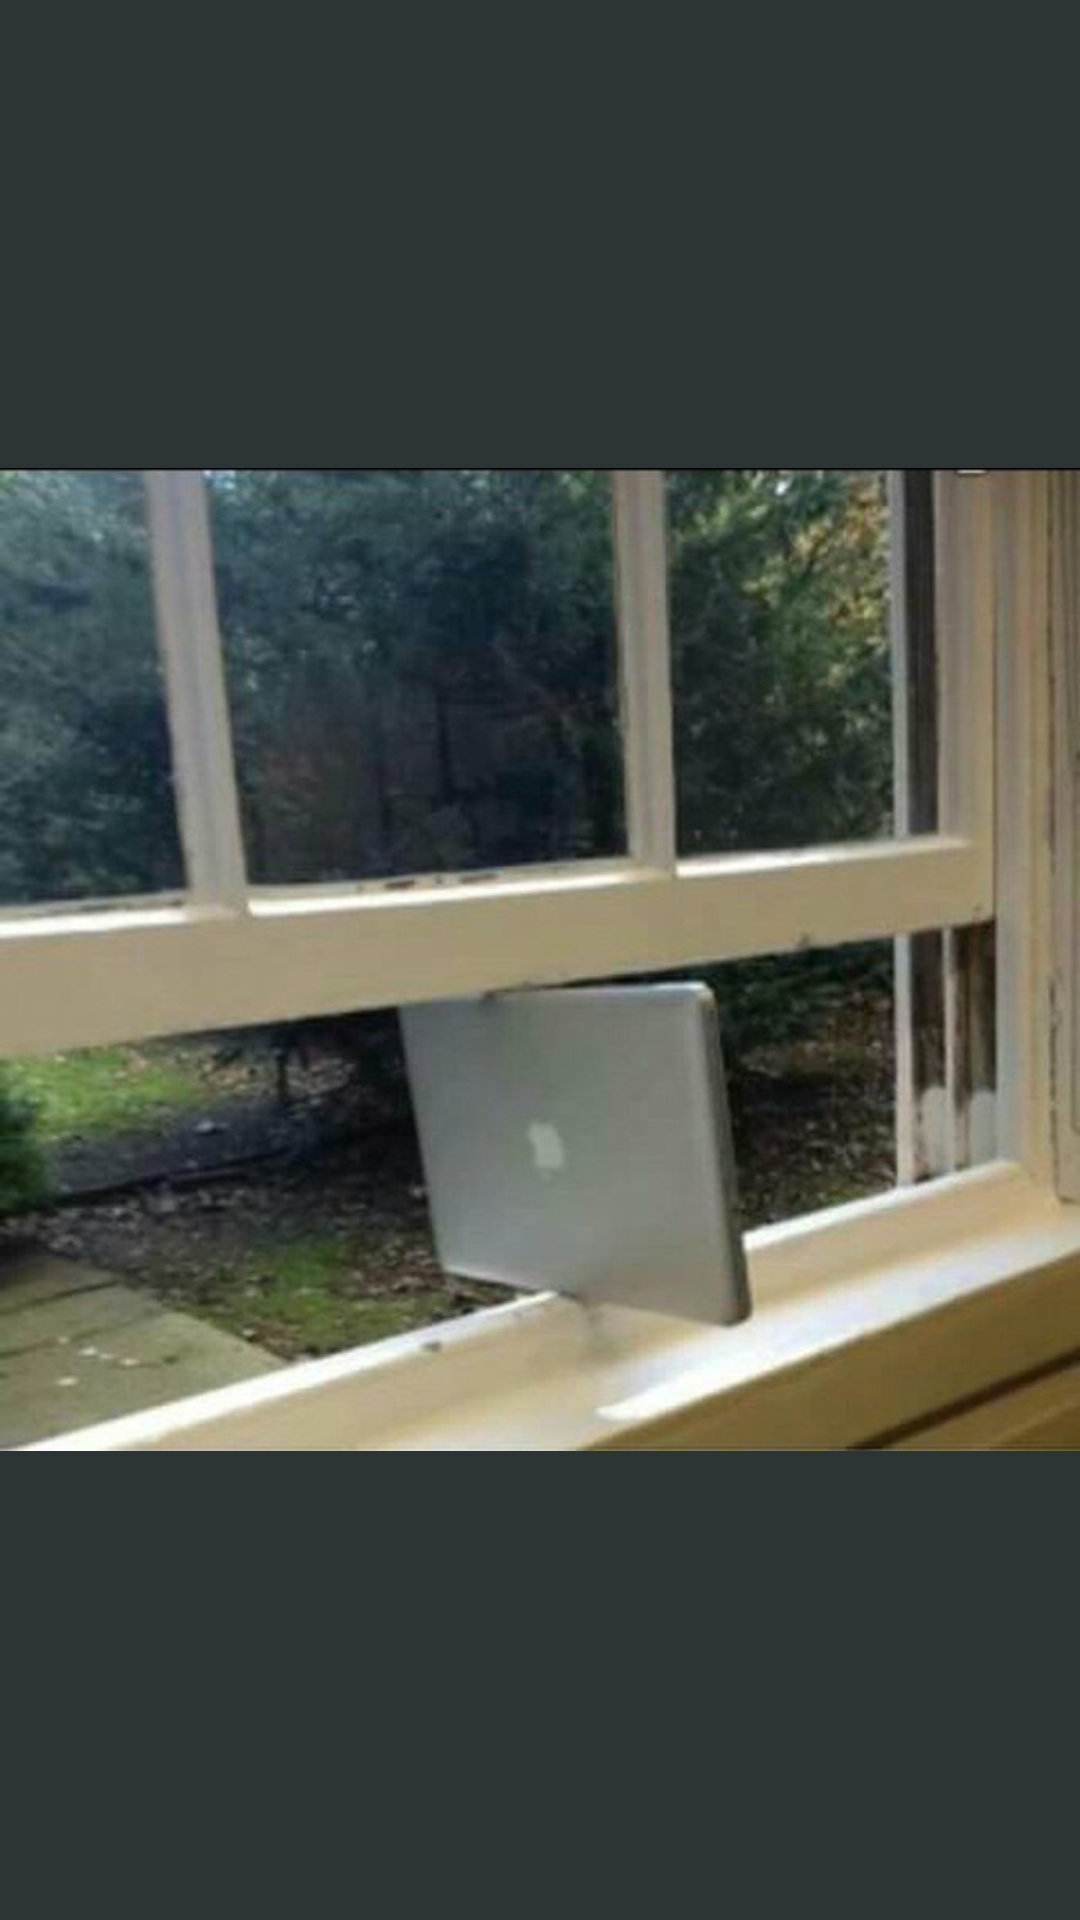 I don't mean to brag, but my MacBook supports windows